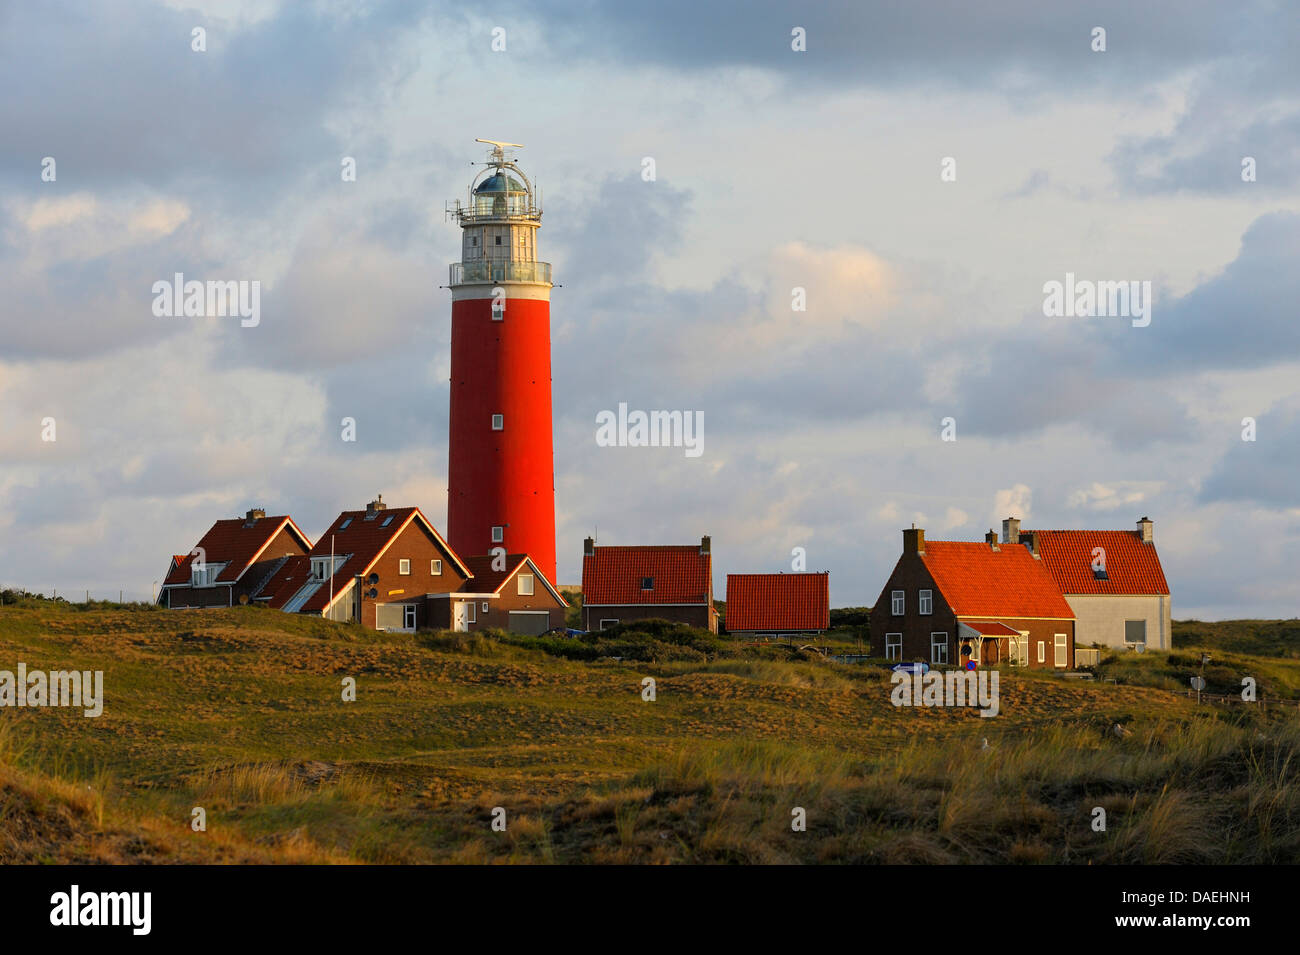 Eierland lighthouse on northernmost tip of the Dutch island of Texel in morning light, Netherlands, Texel Stock Photo